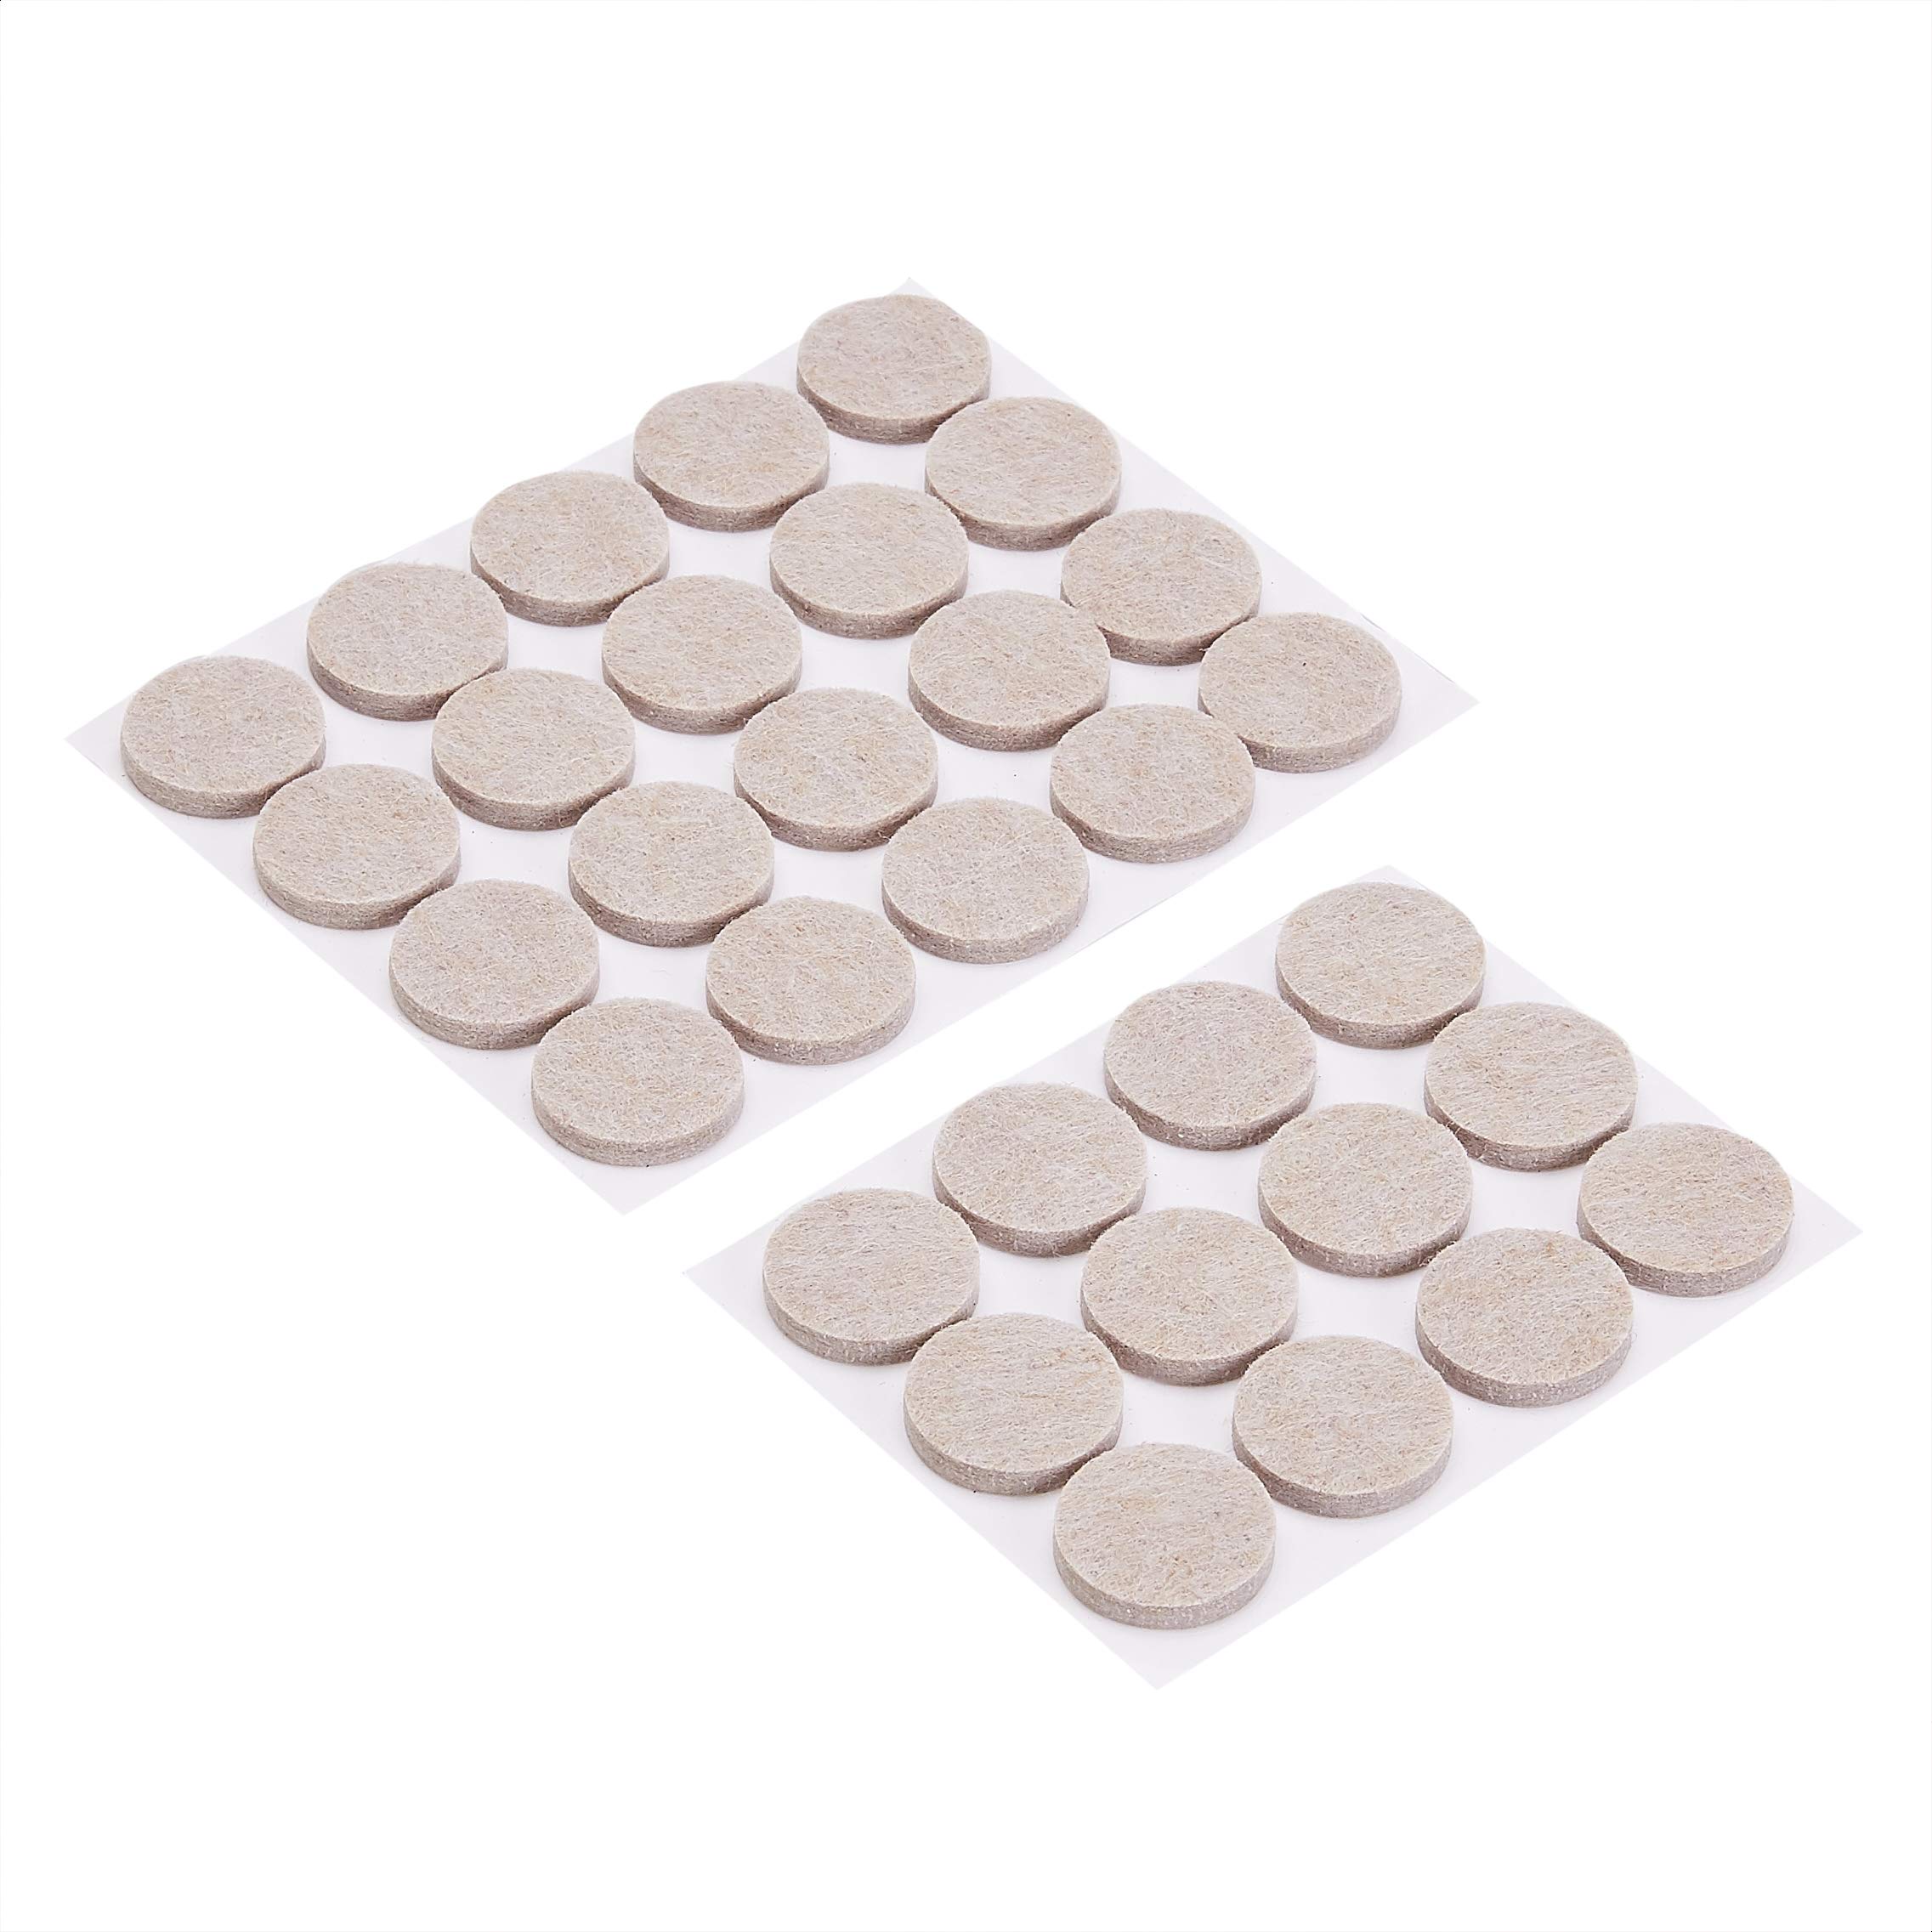 32-Pack 1" Amazon Basics Round Felt Furniture Pads (Beige) $2.55 + Free Shipping w/ Prime or on $25+